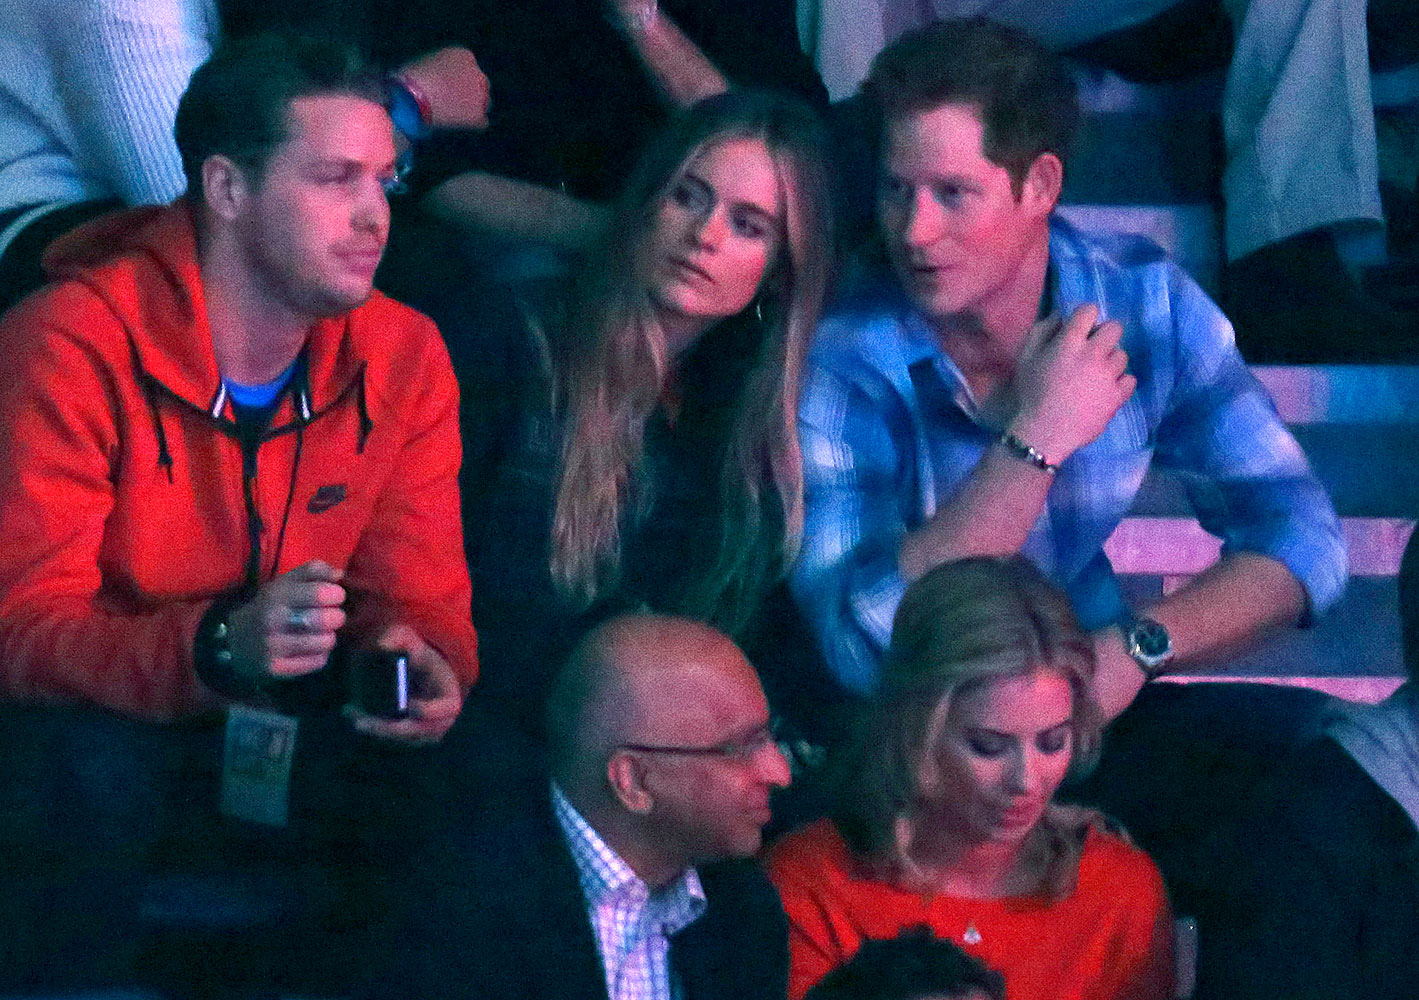 Britain's Prince Harry (R) and Cressida Bonas (2nd R) watch the WE Day UK event at Wembley Arena in London March 7, 2014.  